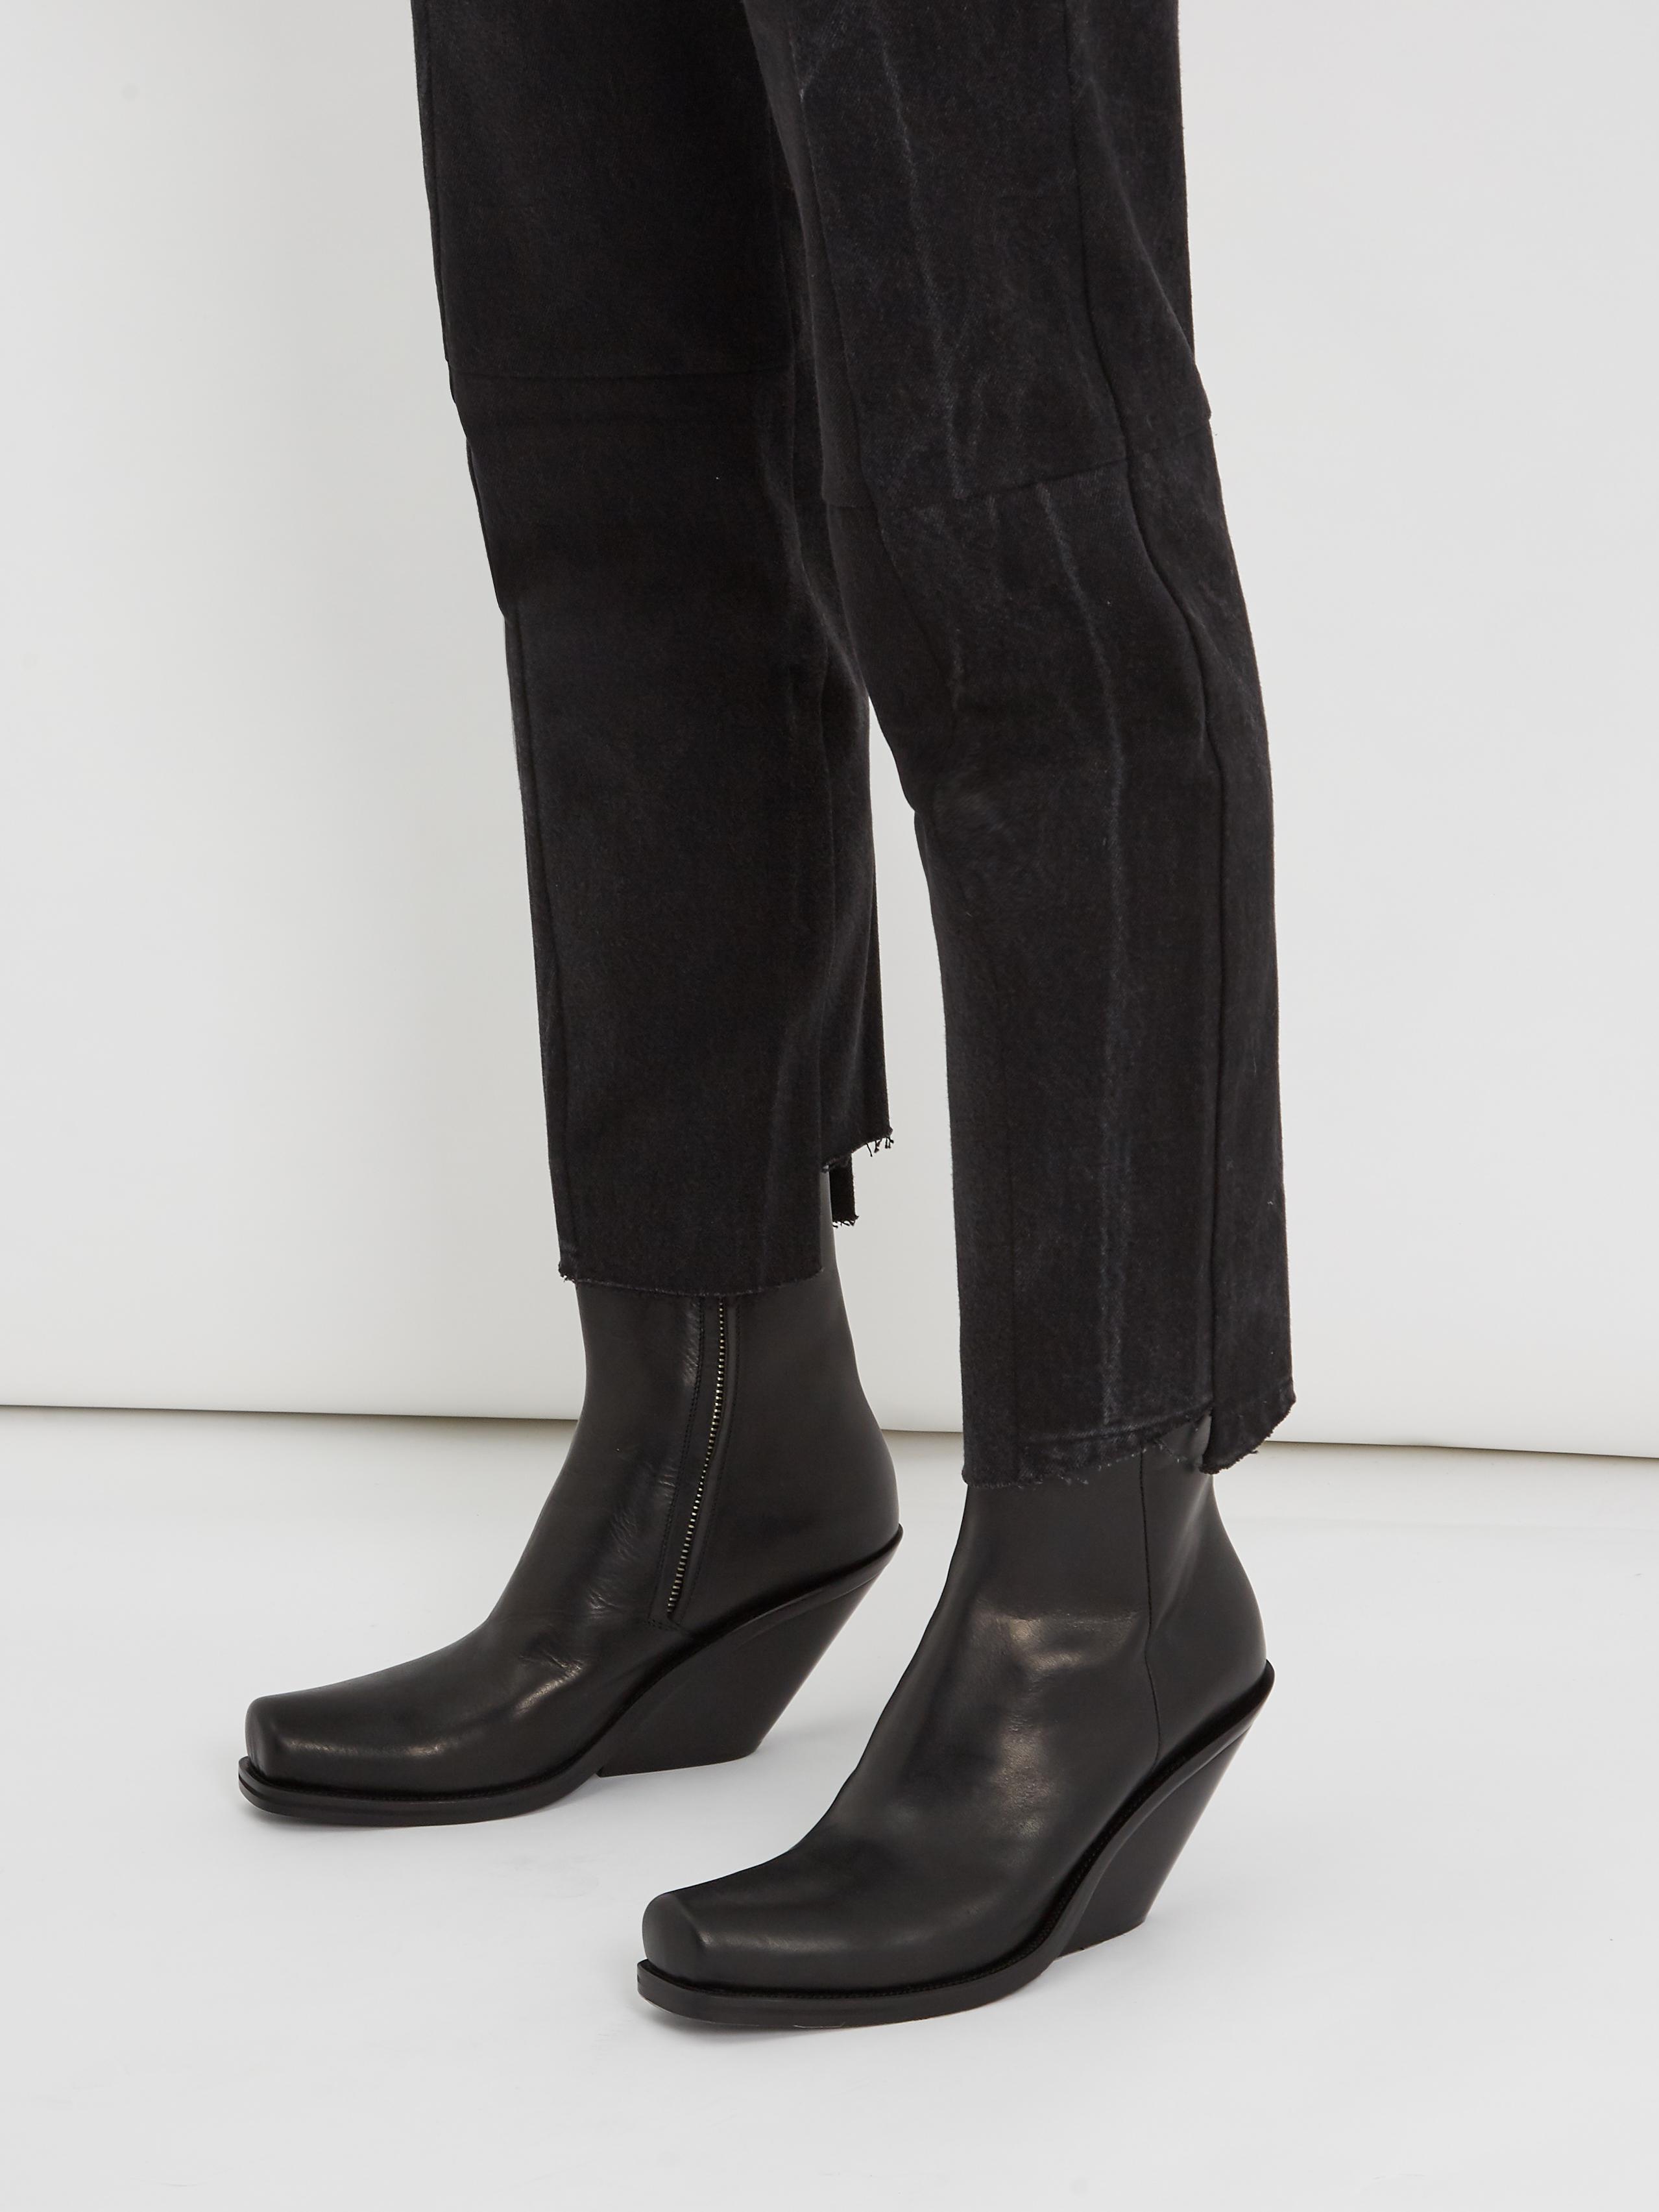 Vetements Slanted-heel Leather Ankle Boots in Black for Men - Lyst